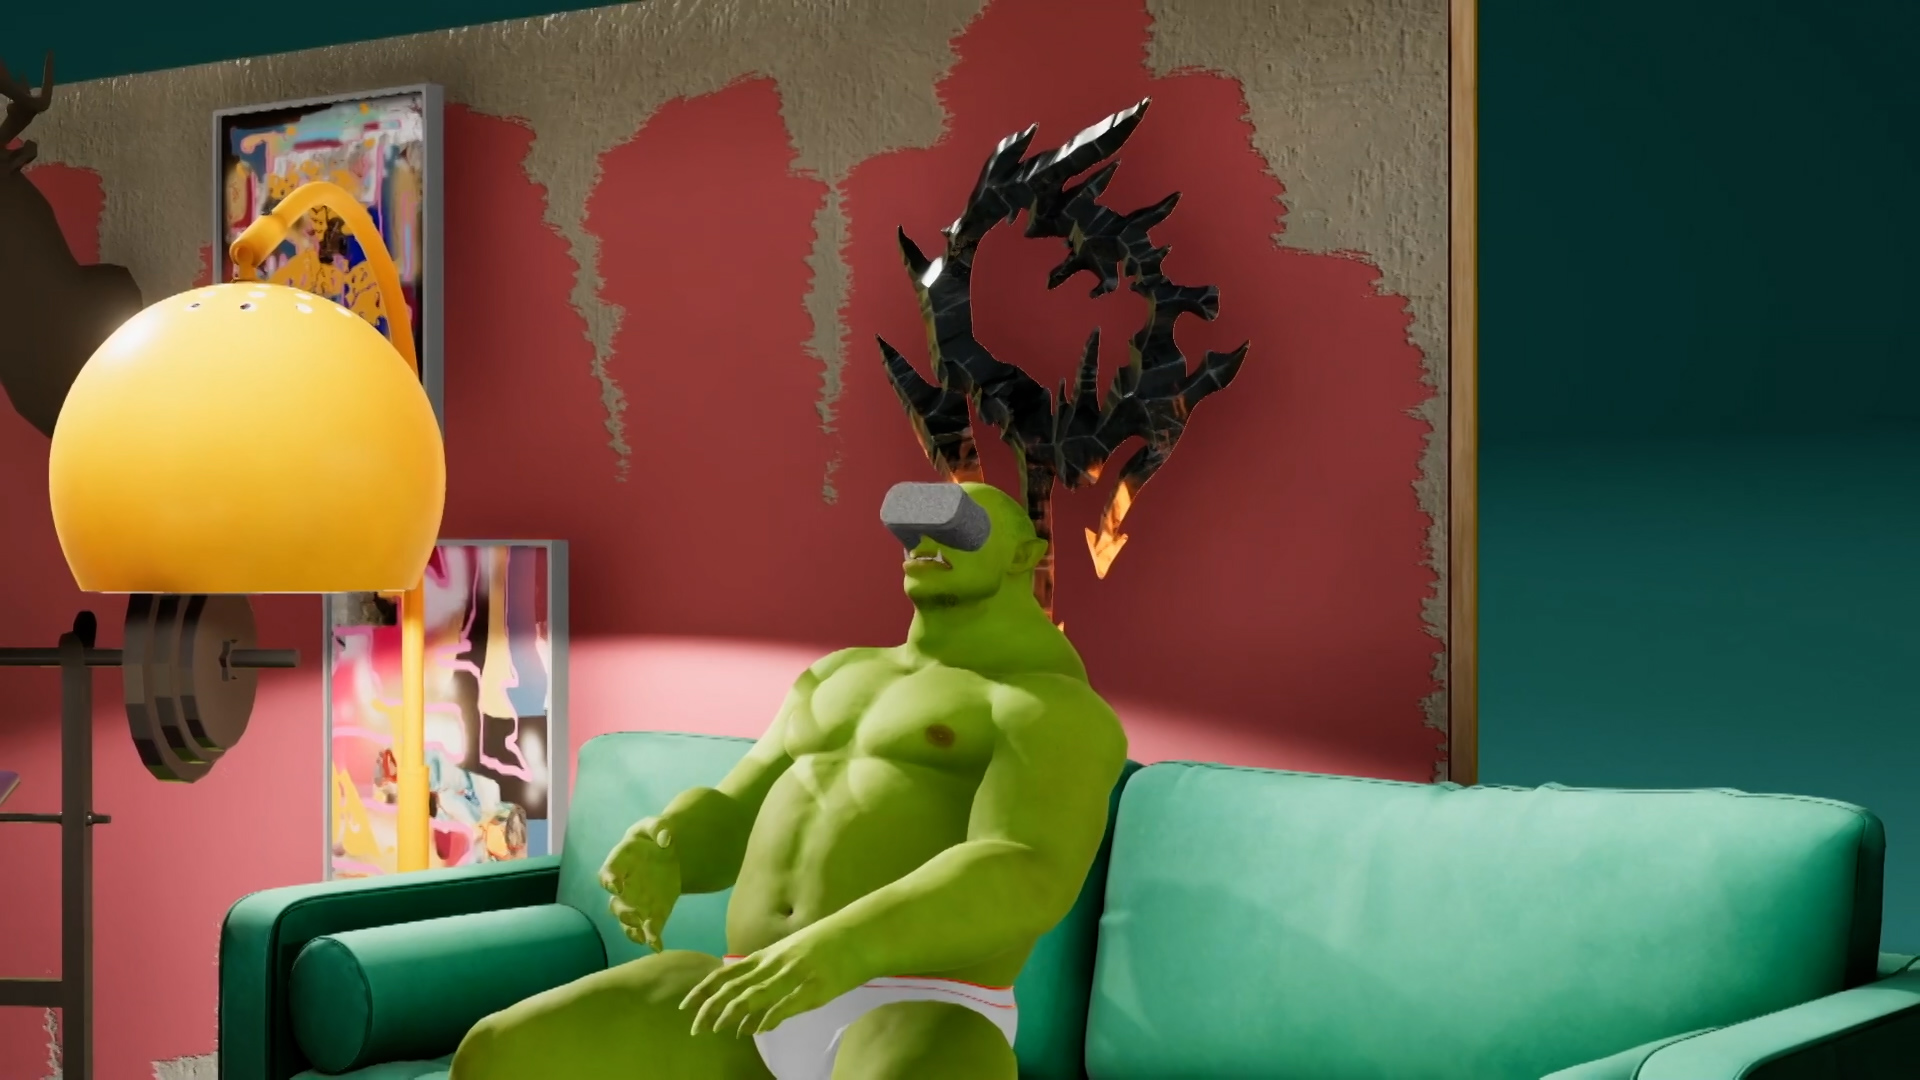 an orc has vr glasses on in a sims like environment and sits on the sofa